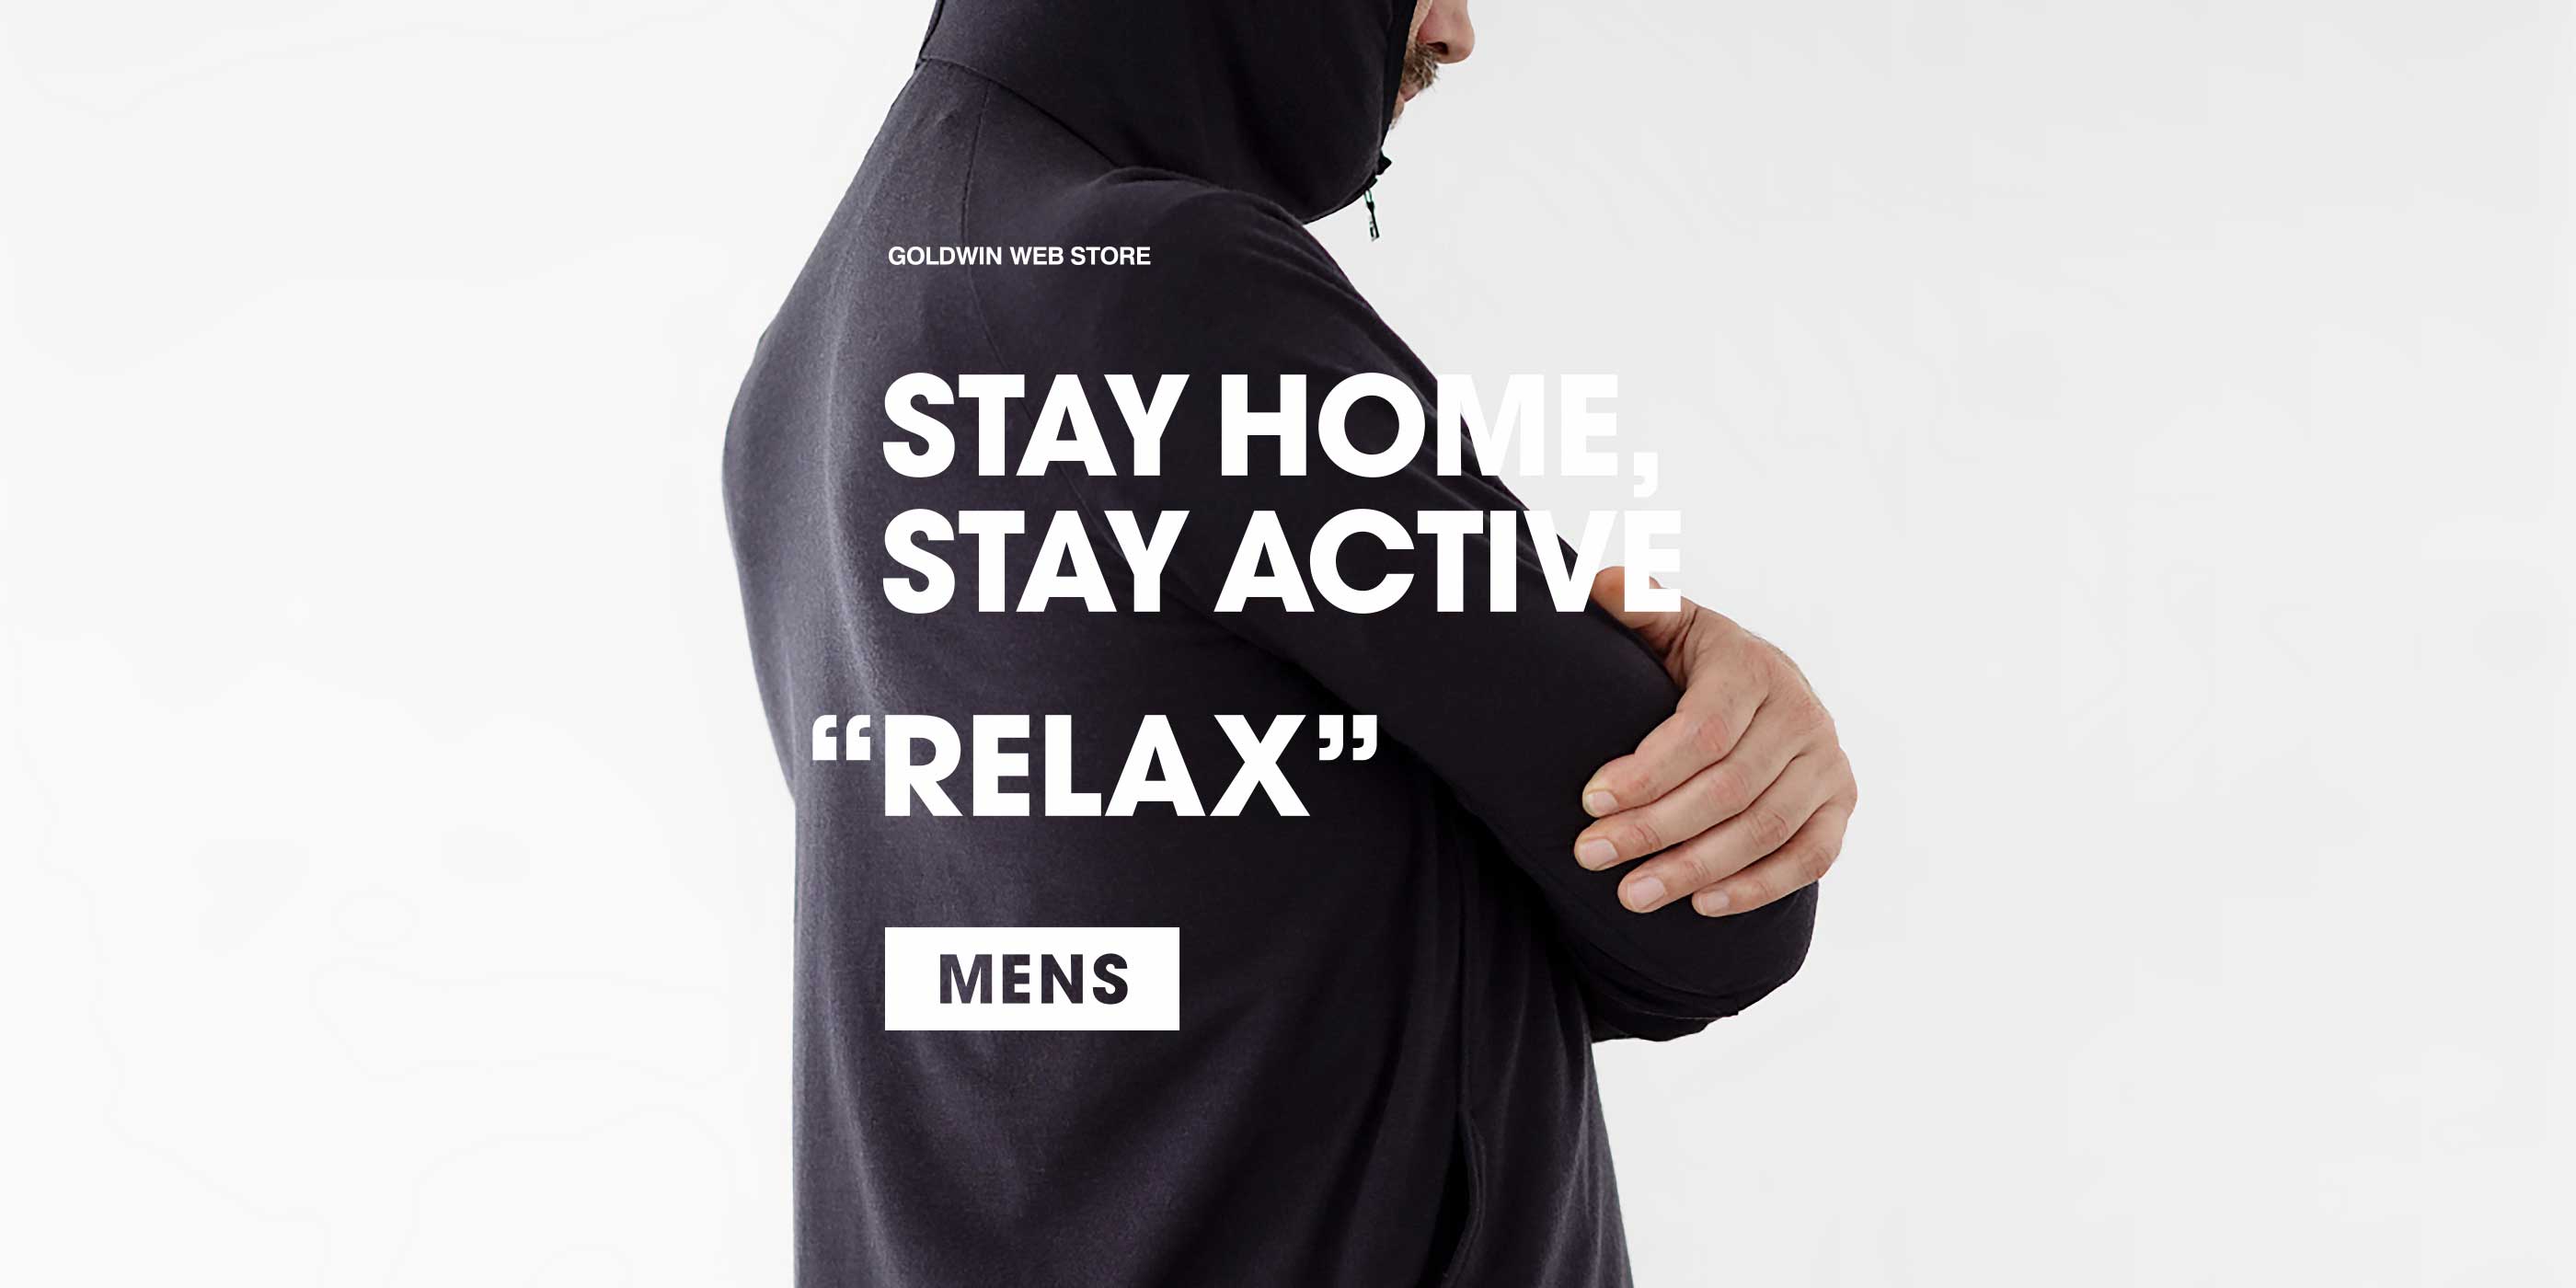 STAY HOME, STAY ACTIVE "RELAX" MENS